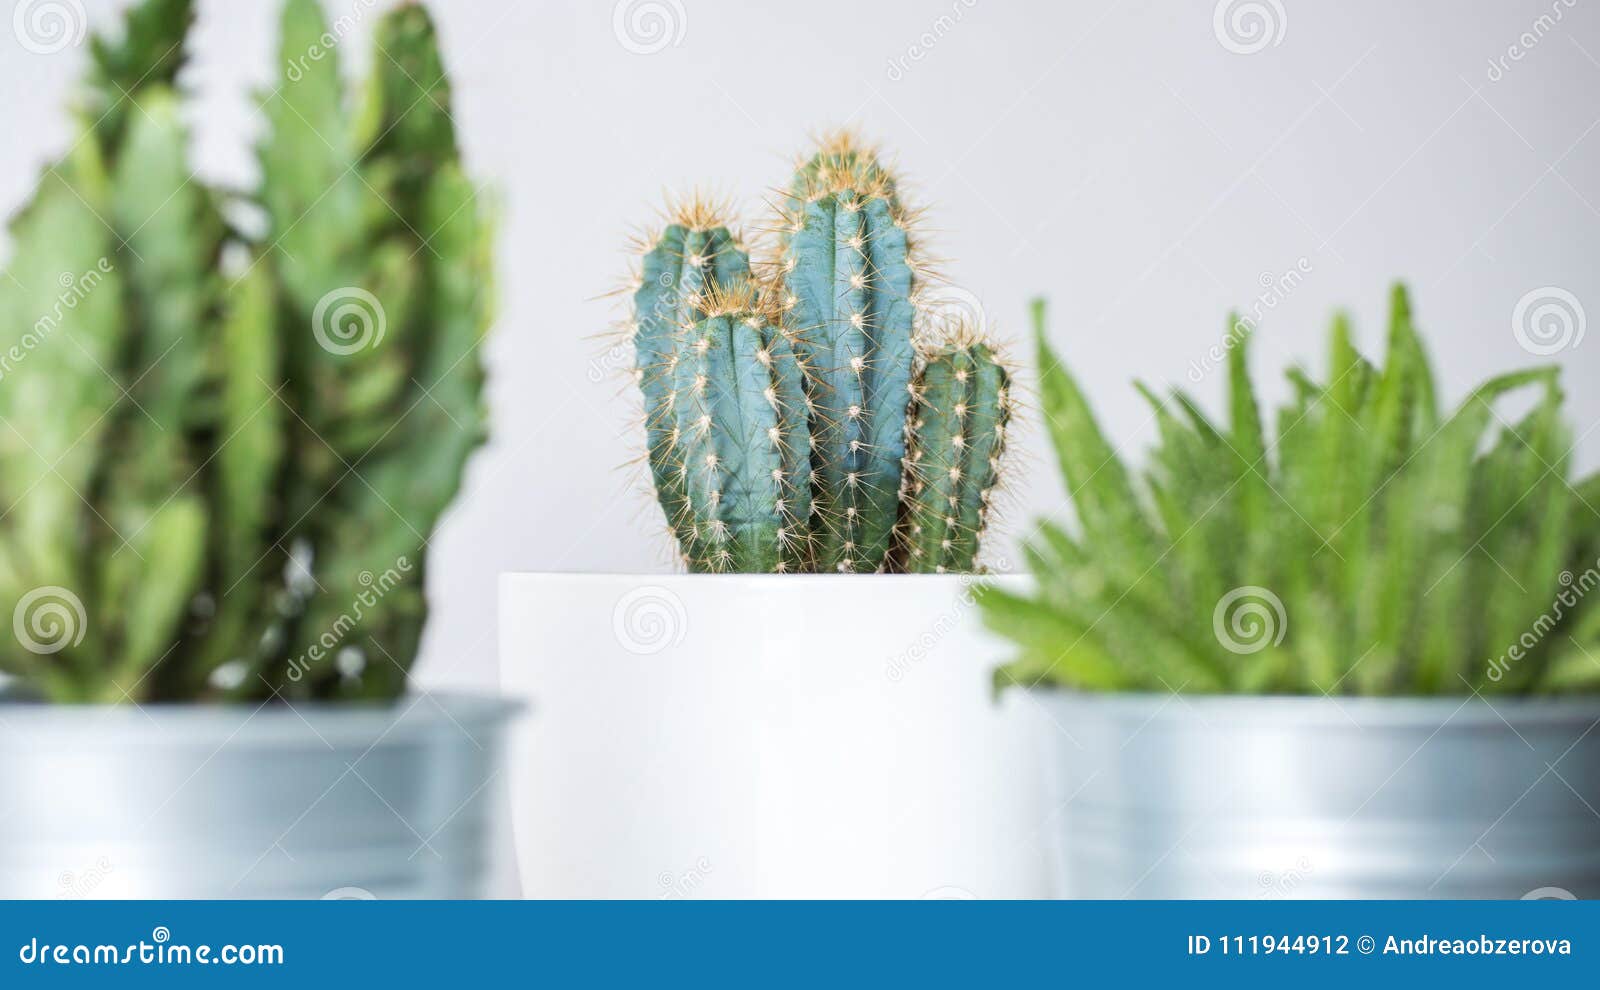 Collection of various cactus and succulent plants in different pots. Potted cactus house plants. Collection of various cactus and succulent plants in different pots. Potted cactus house plants against white wall.